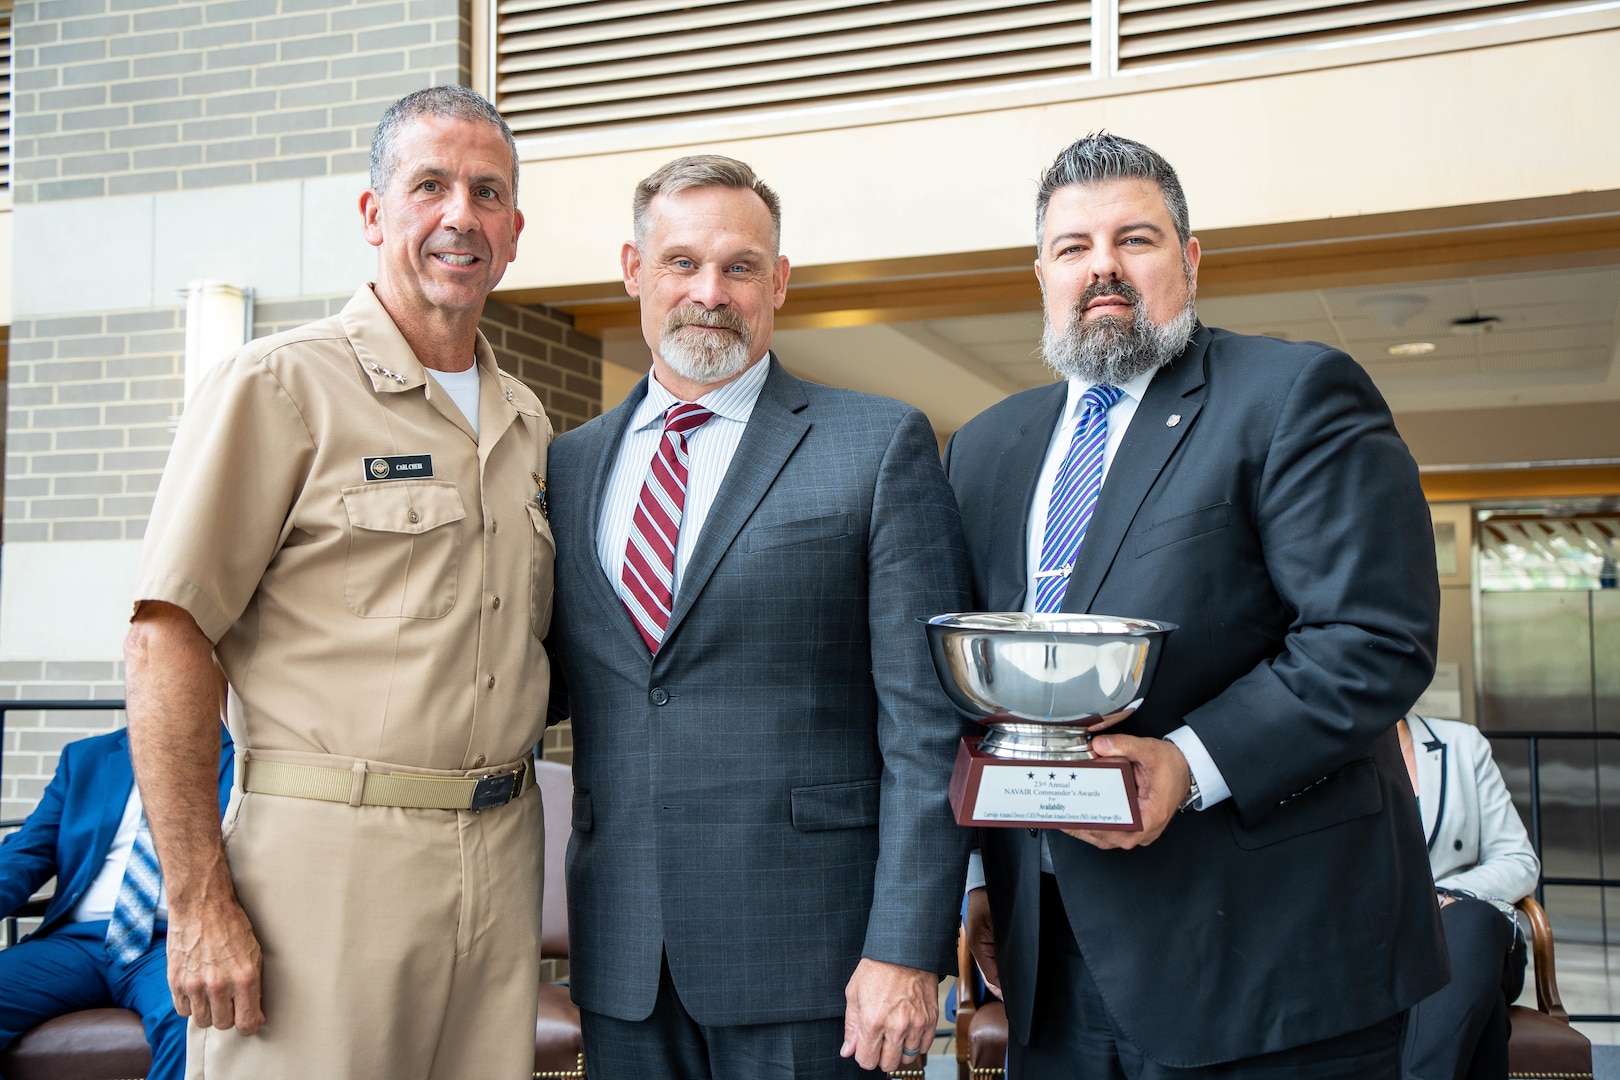 NAVAIR Commander, Vice Admiral Carl Chebi (left) presented thee Naval Surface Warfare Center Indian Head Division Cartridge and Propellant Actuated Device (CAD/PAD) Joint Program Office (JPO) with the Naval Air Systems Command Commander’s Award for Availability during a ceremony at the Naval Air Station Patuxent River in Lexington Park, Maryland, May 31. CAD/PAD JPO Director Gregory Longworth (center) and JPO Navy Deputy Program Manager Jason Caron (right) received the award on behalf of the team of engineers, technicians, logisticians, analysts, handlers, drivers and radiographers from across the command who were responsible for the prestigious award.